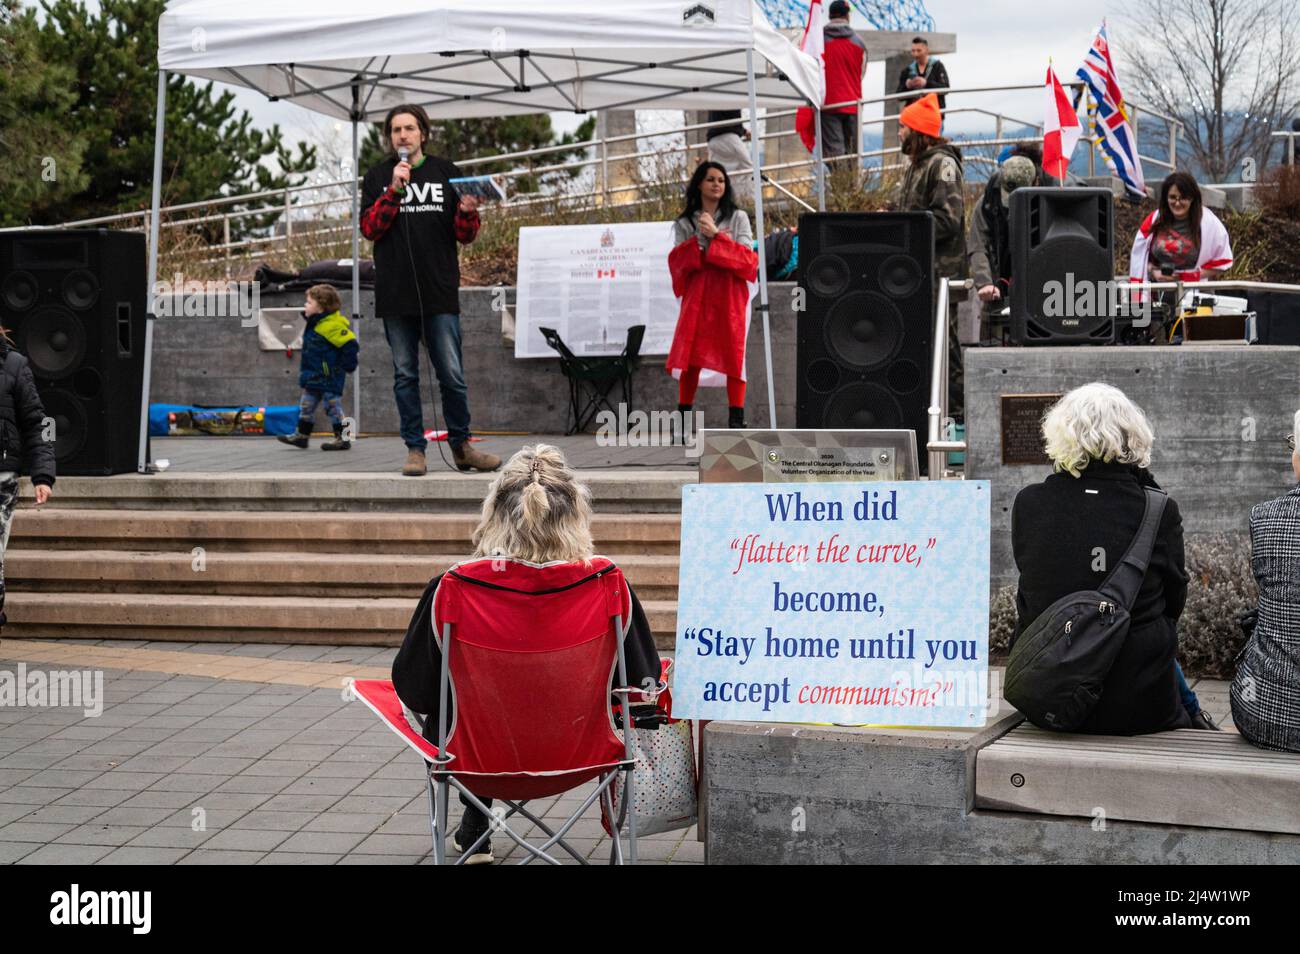 Photo of spectators and a sign connecting COVID to communism at an event to protest the country's vaccine mandates and other COVID restrictions. Stock Photo